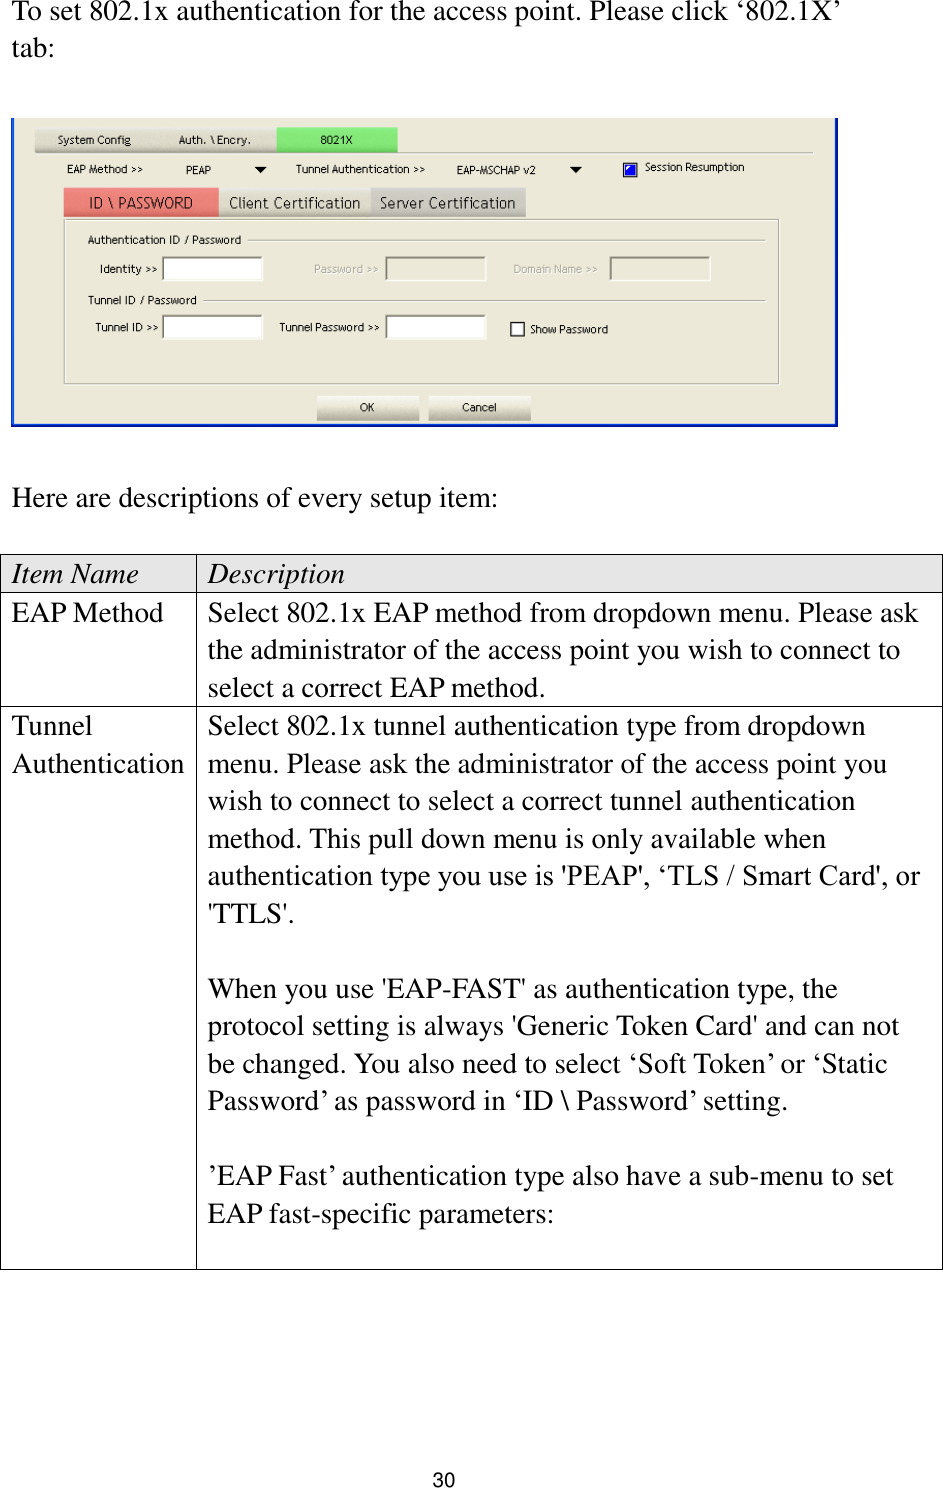  30 To set 802.1x authentication for the access point. Please click „802.1X‟ tab:    Here are descriptions of every setup item:  Item Name Description EAP Method Select 802.1x EAP method from dropdown menu. Please ask the administrator of the access point you wish to connect to select a correct EAP method. Tunnel Authentication Select 802.1x tunnel authentication type from dropdown menu. Please ask the administrator of the access point you wish to connect to select a correct tunnel authentication method. This pull down menu is only available when authentication type you use is &apos;PEAP&apos;, „TLS / Smart Card&apos;, or &apos;TTLS&apos;.    When you use &apos;EAP-FAST&apos; as authentication type, the protocol setting is always &apos;Generic Token Card&apos; and can not be changed. You also need to select „Soft Token‟ or „Static Password‟ as password in „ID \ Password‟ setting.  ‟EAP Fast‟ authentication type also have a sub-menu to set EAP fast-specific parameters:  